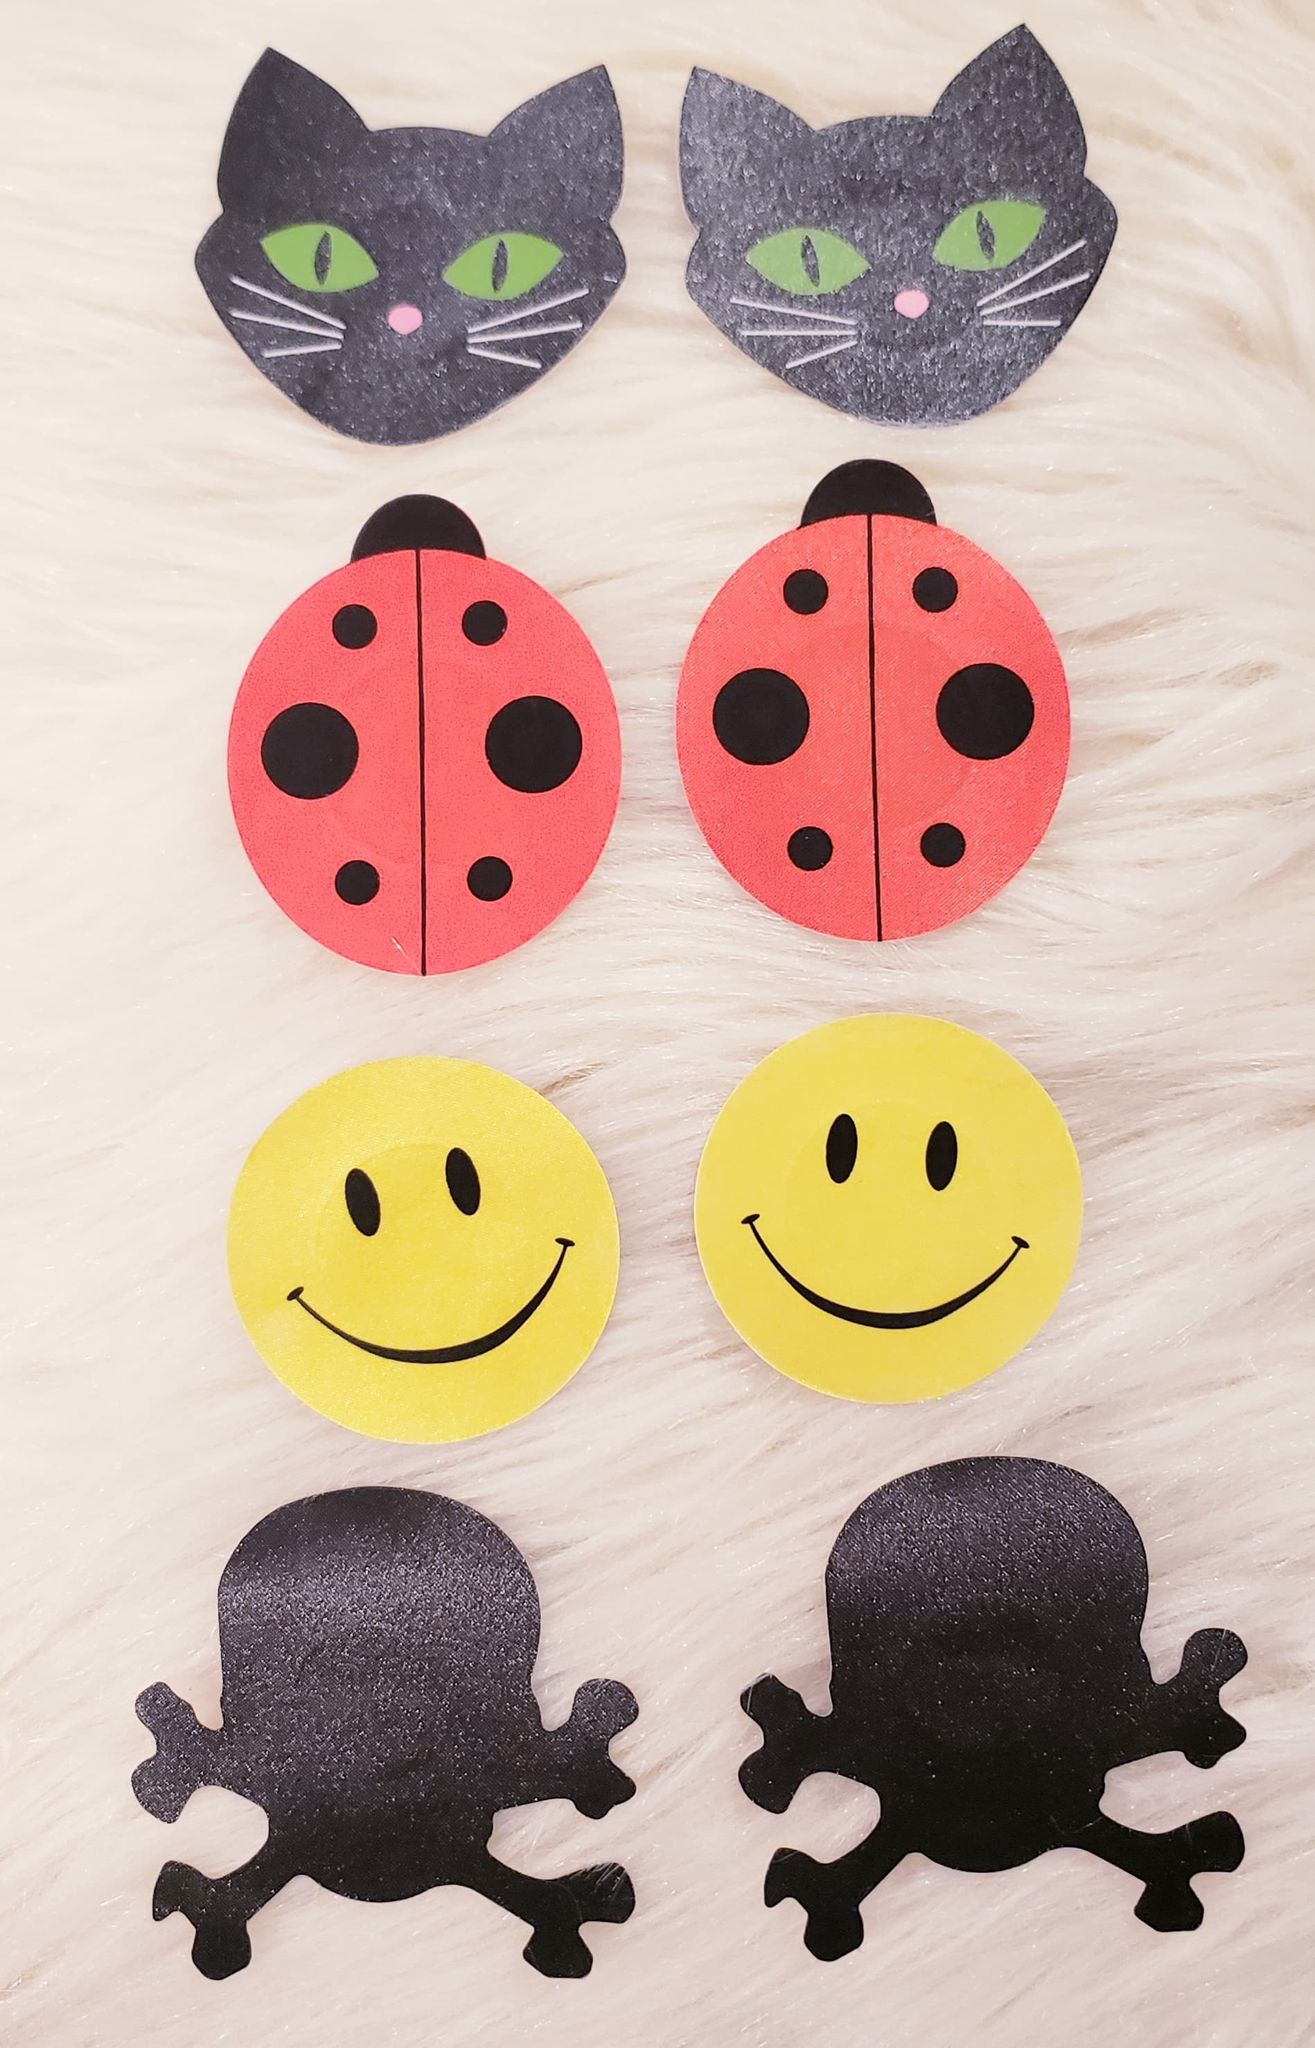 4 Pairs Pasties - Cats, Skull, Lady Bug, Smiley. Cross Bones, Nipple Covers, Stickers, Lifestyle, Rally, Rave, Costume, Lingerie